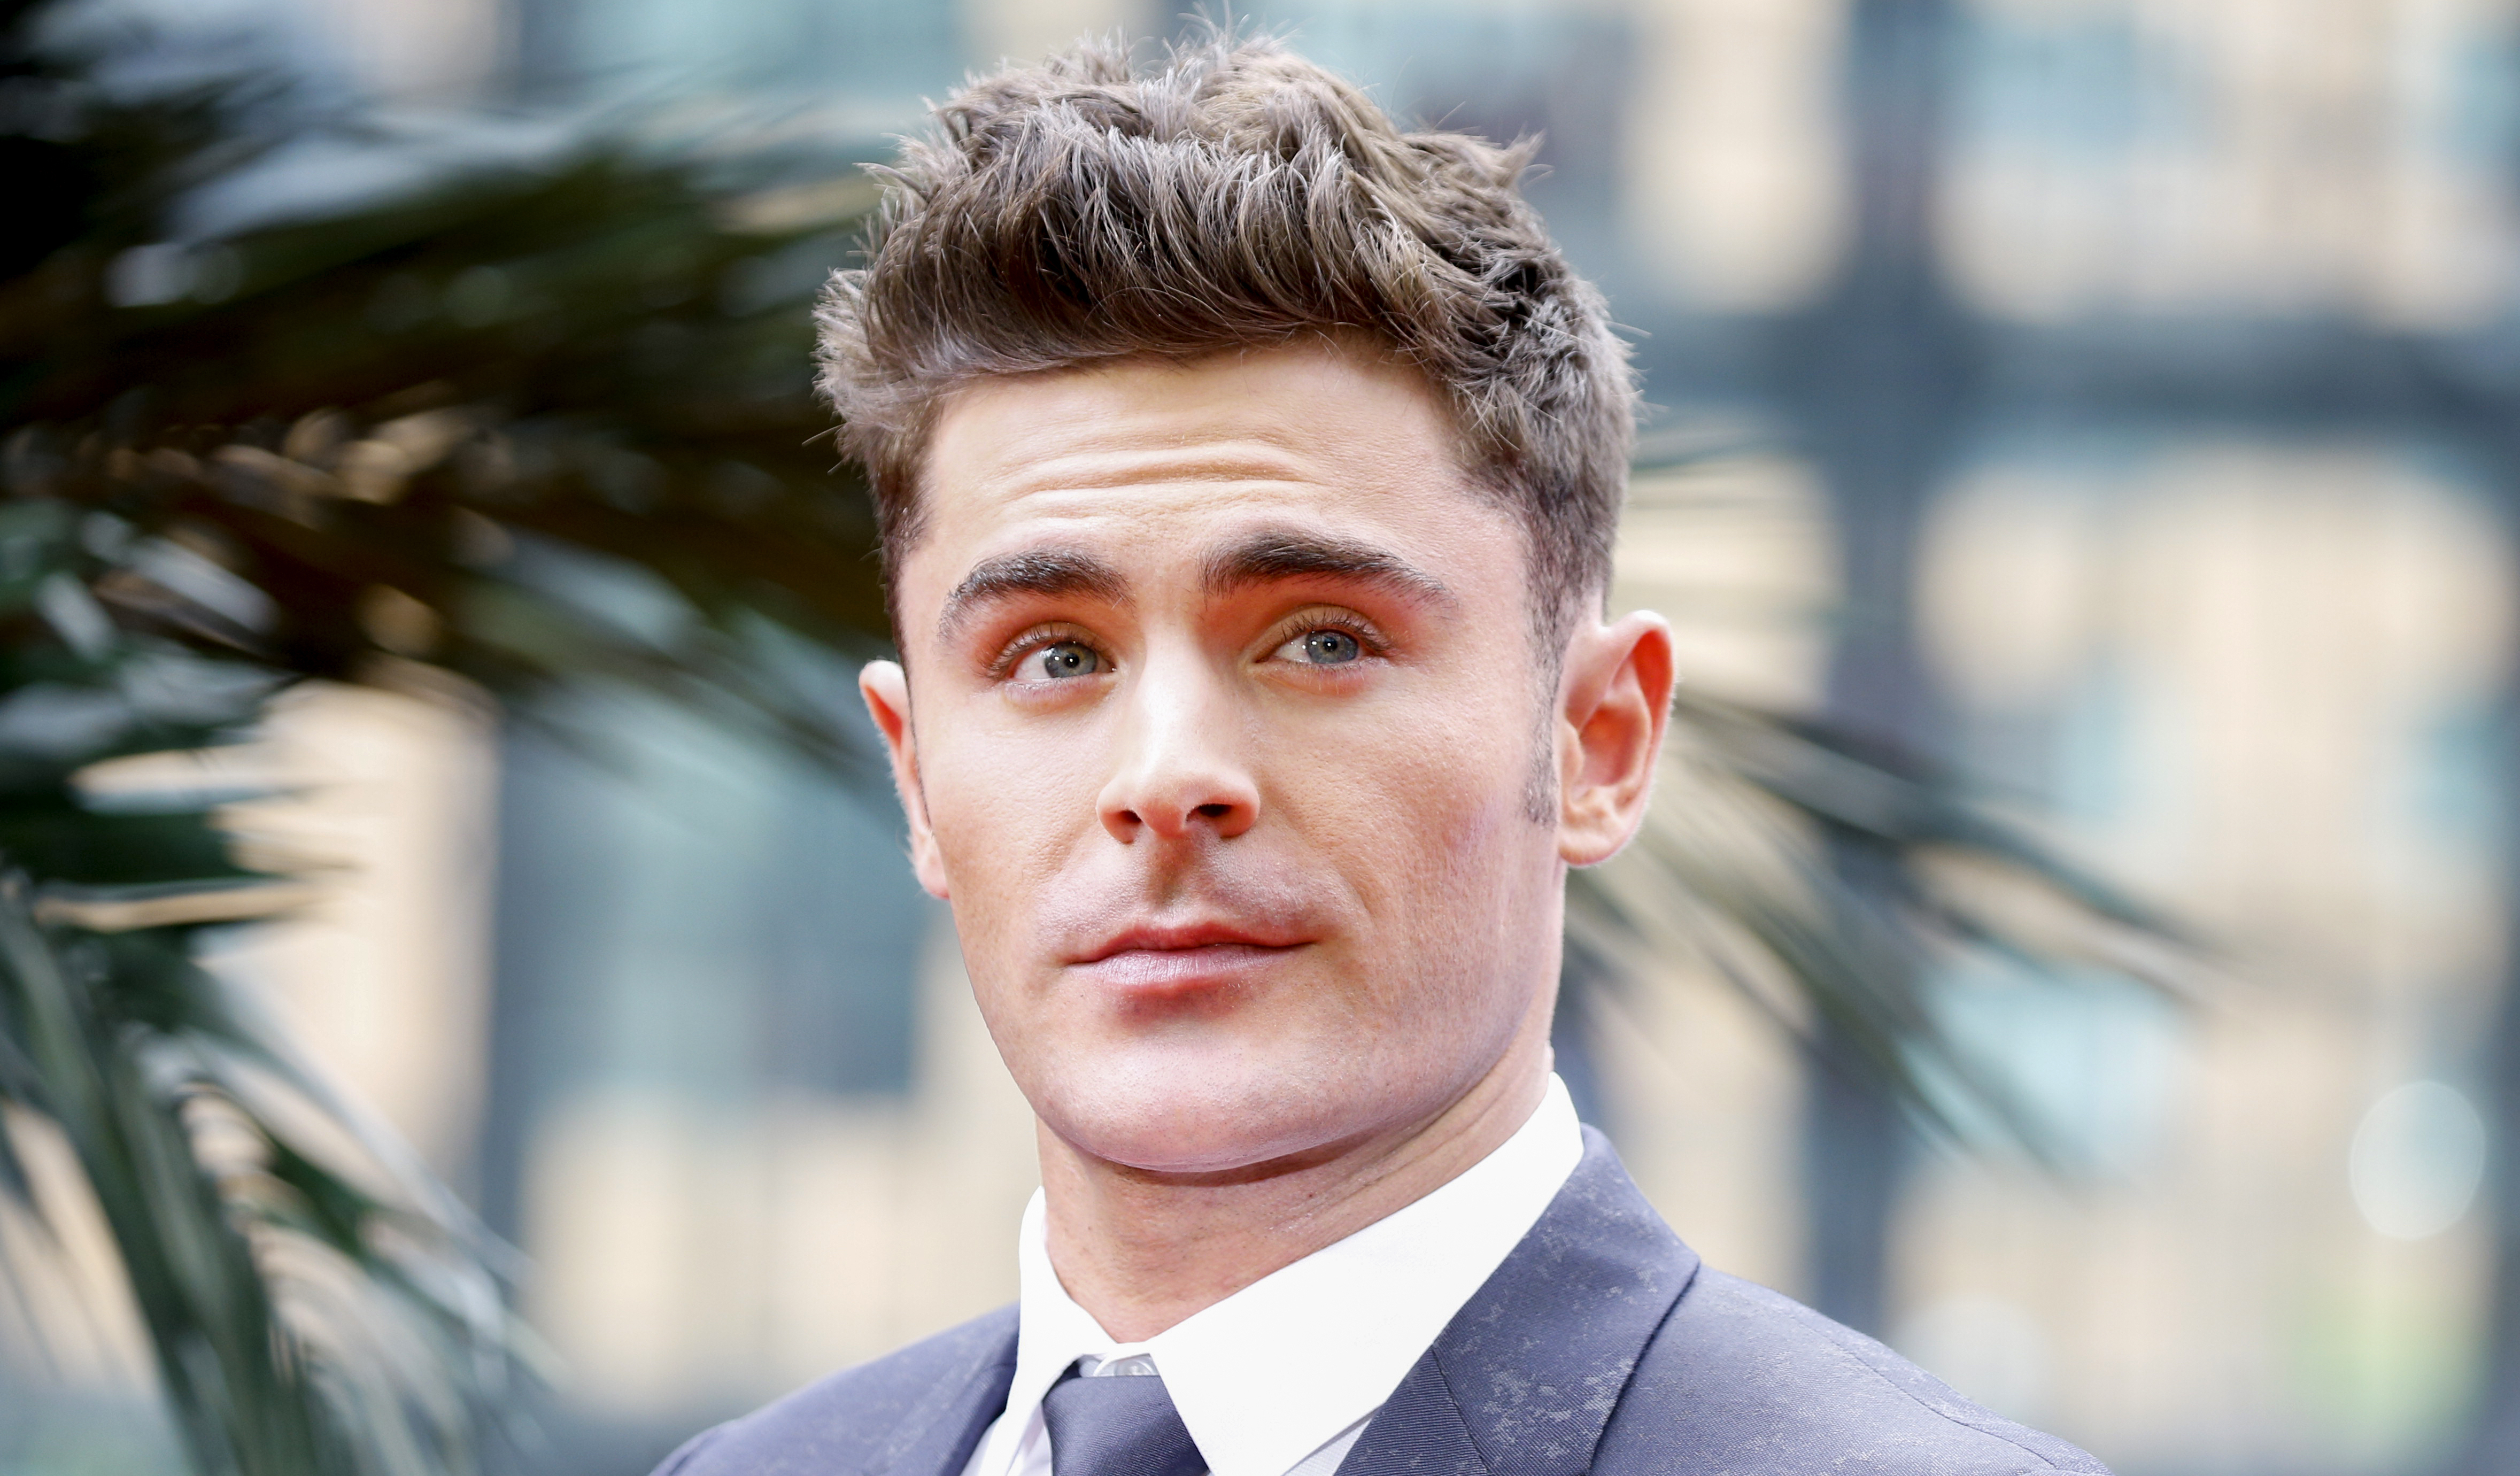 Zac Efron's New Mullet Haircut Has Us Feeling Some Type of Way